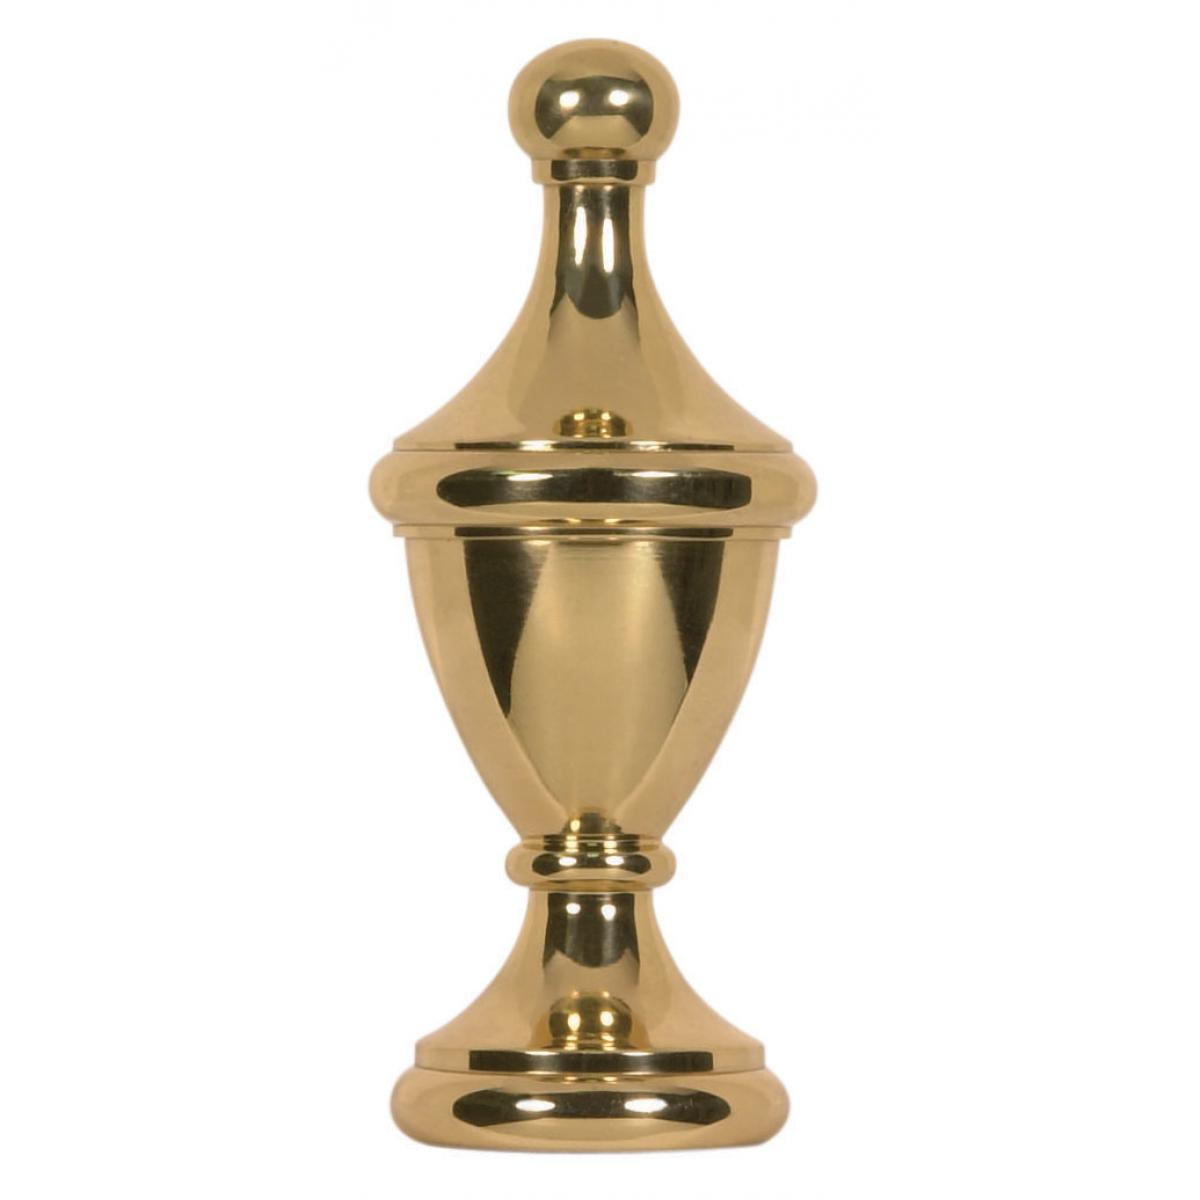 Satco 90-1734 Large Urn Finial 2-3/4" Height 1/8 IP Polished Brass Finish